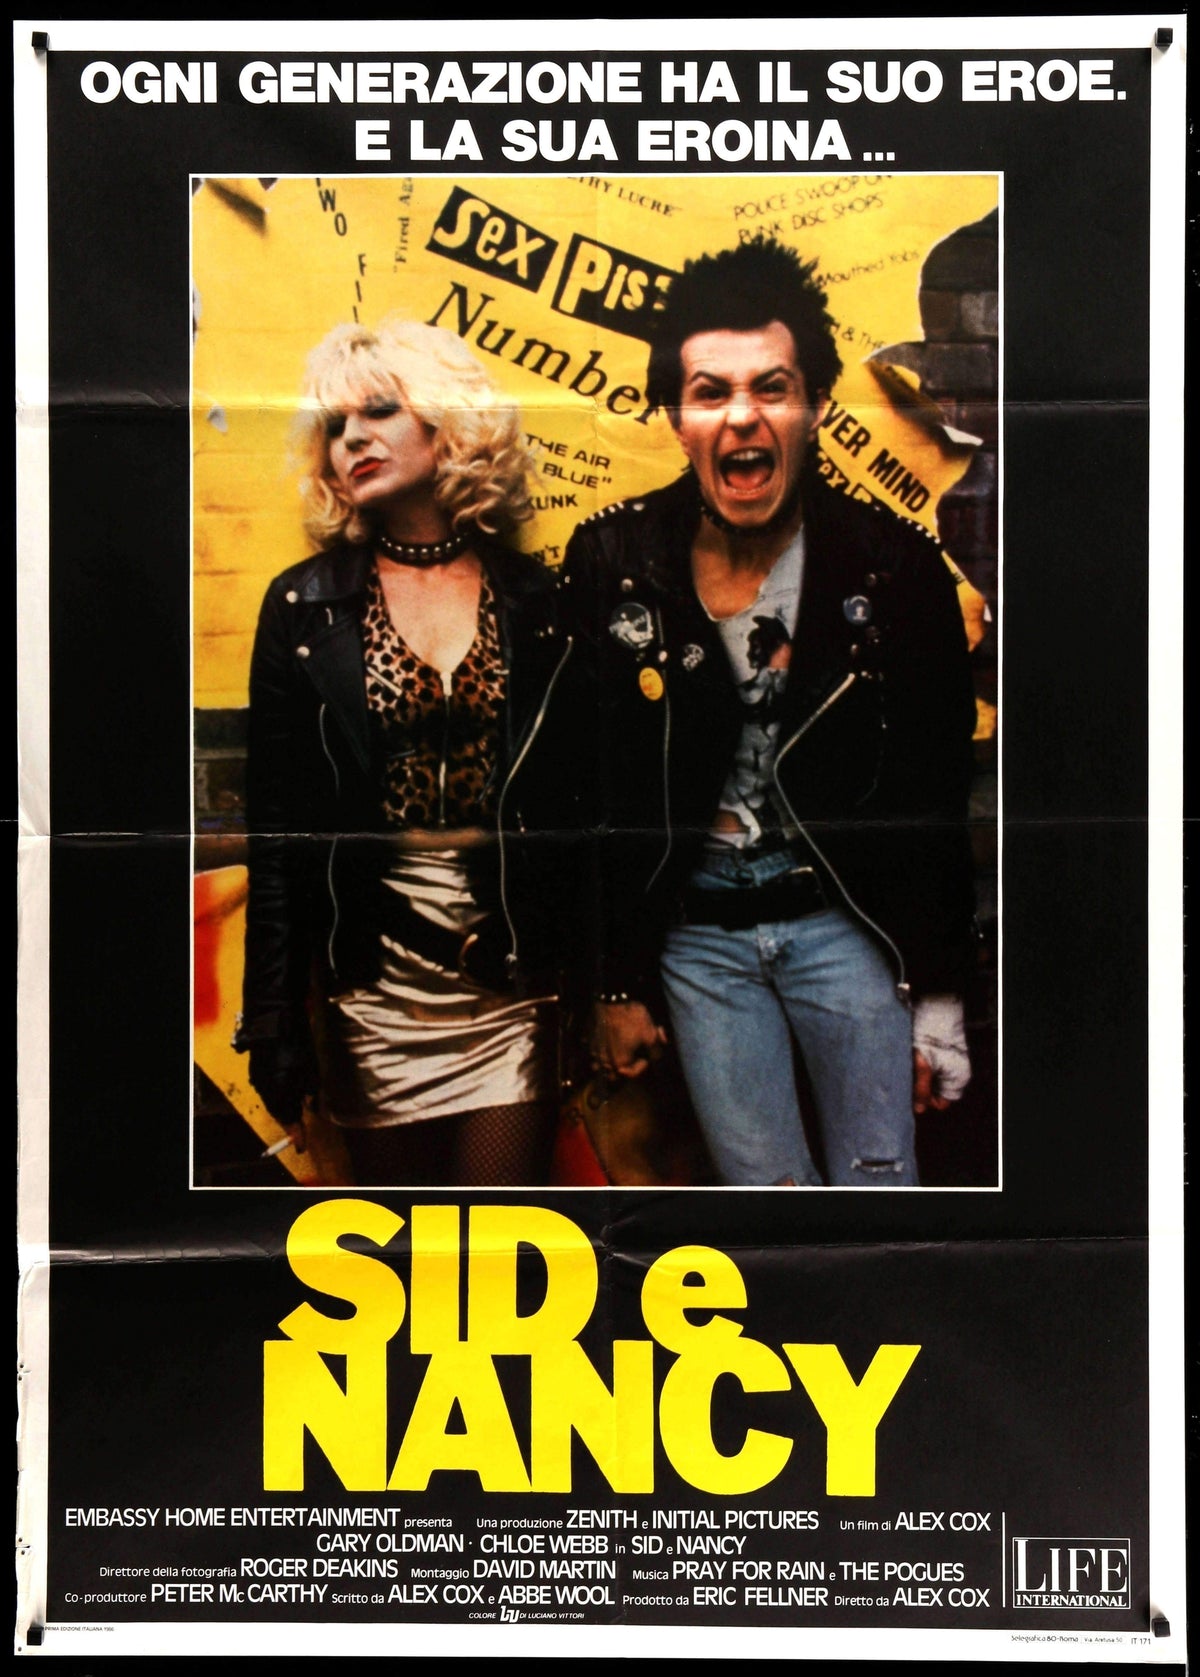 Reflecting on 30 years of Sid & Nancy with Alex Cox